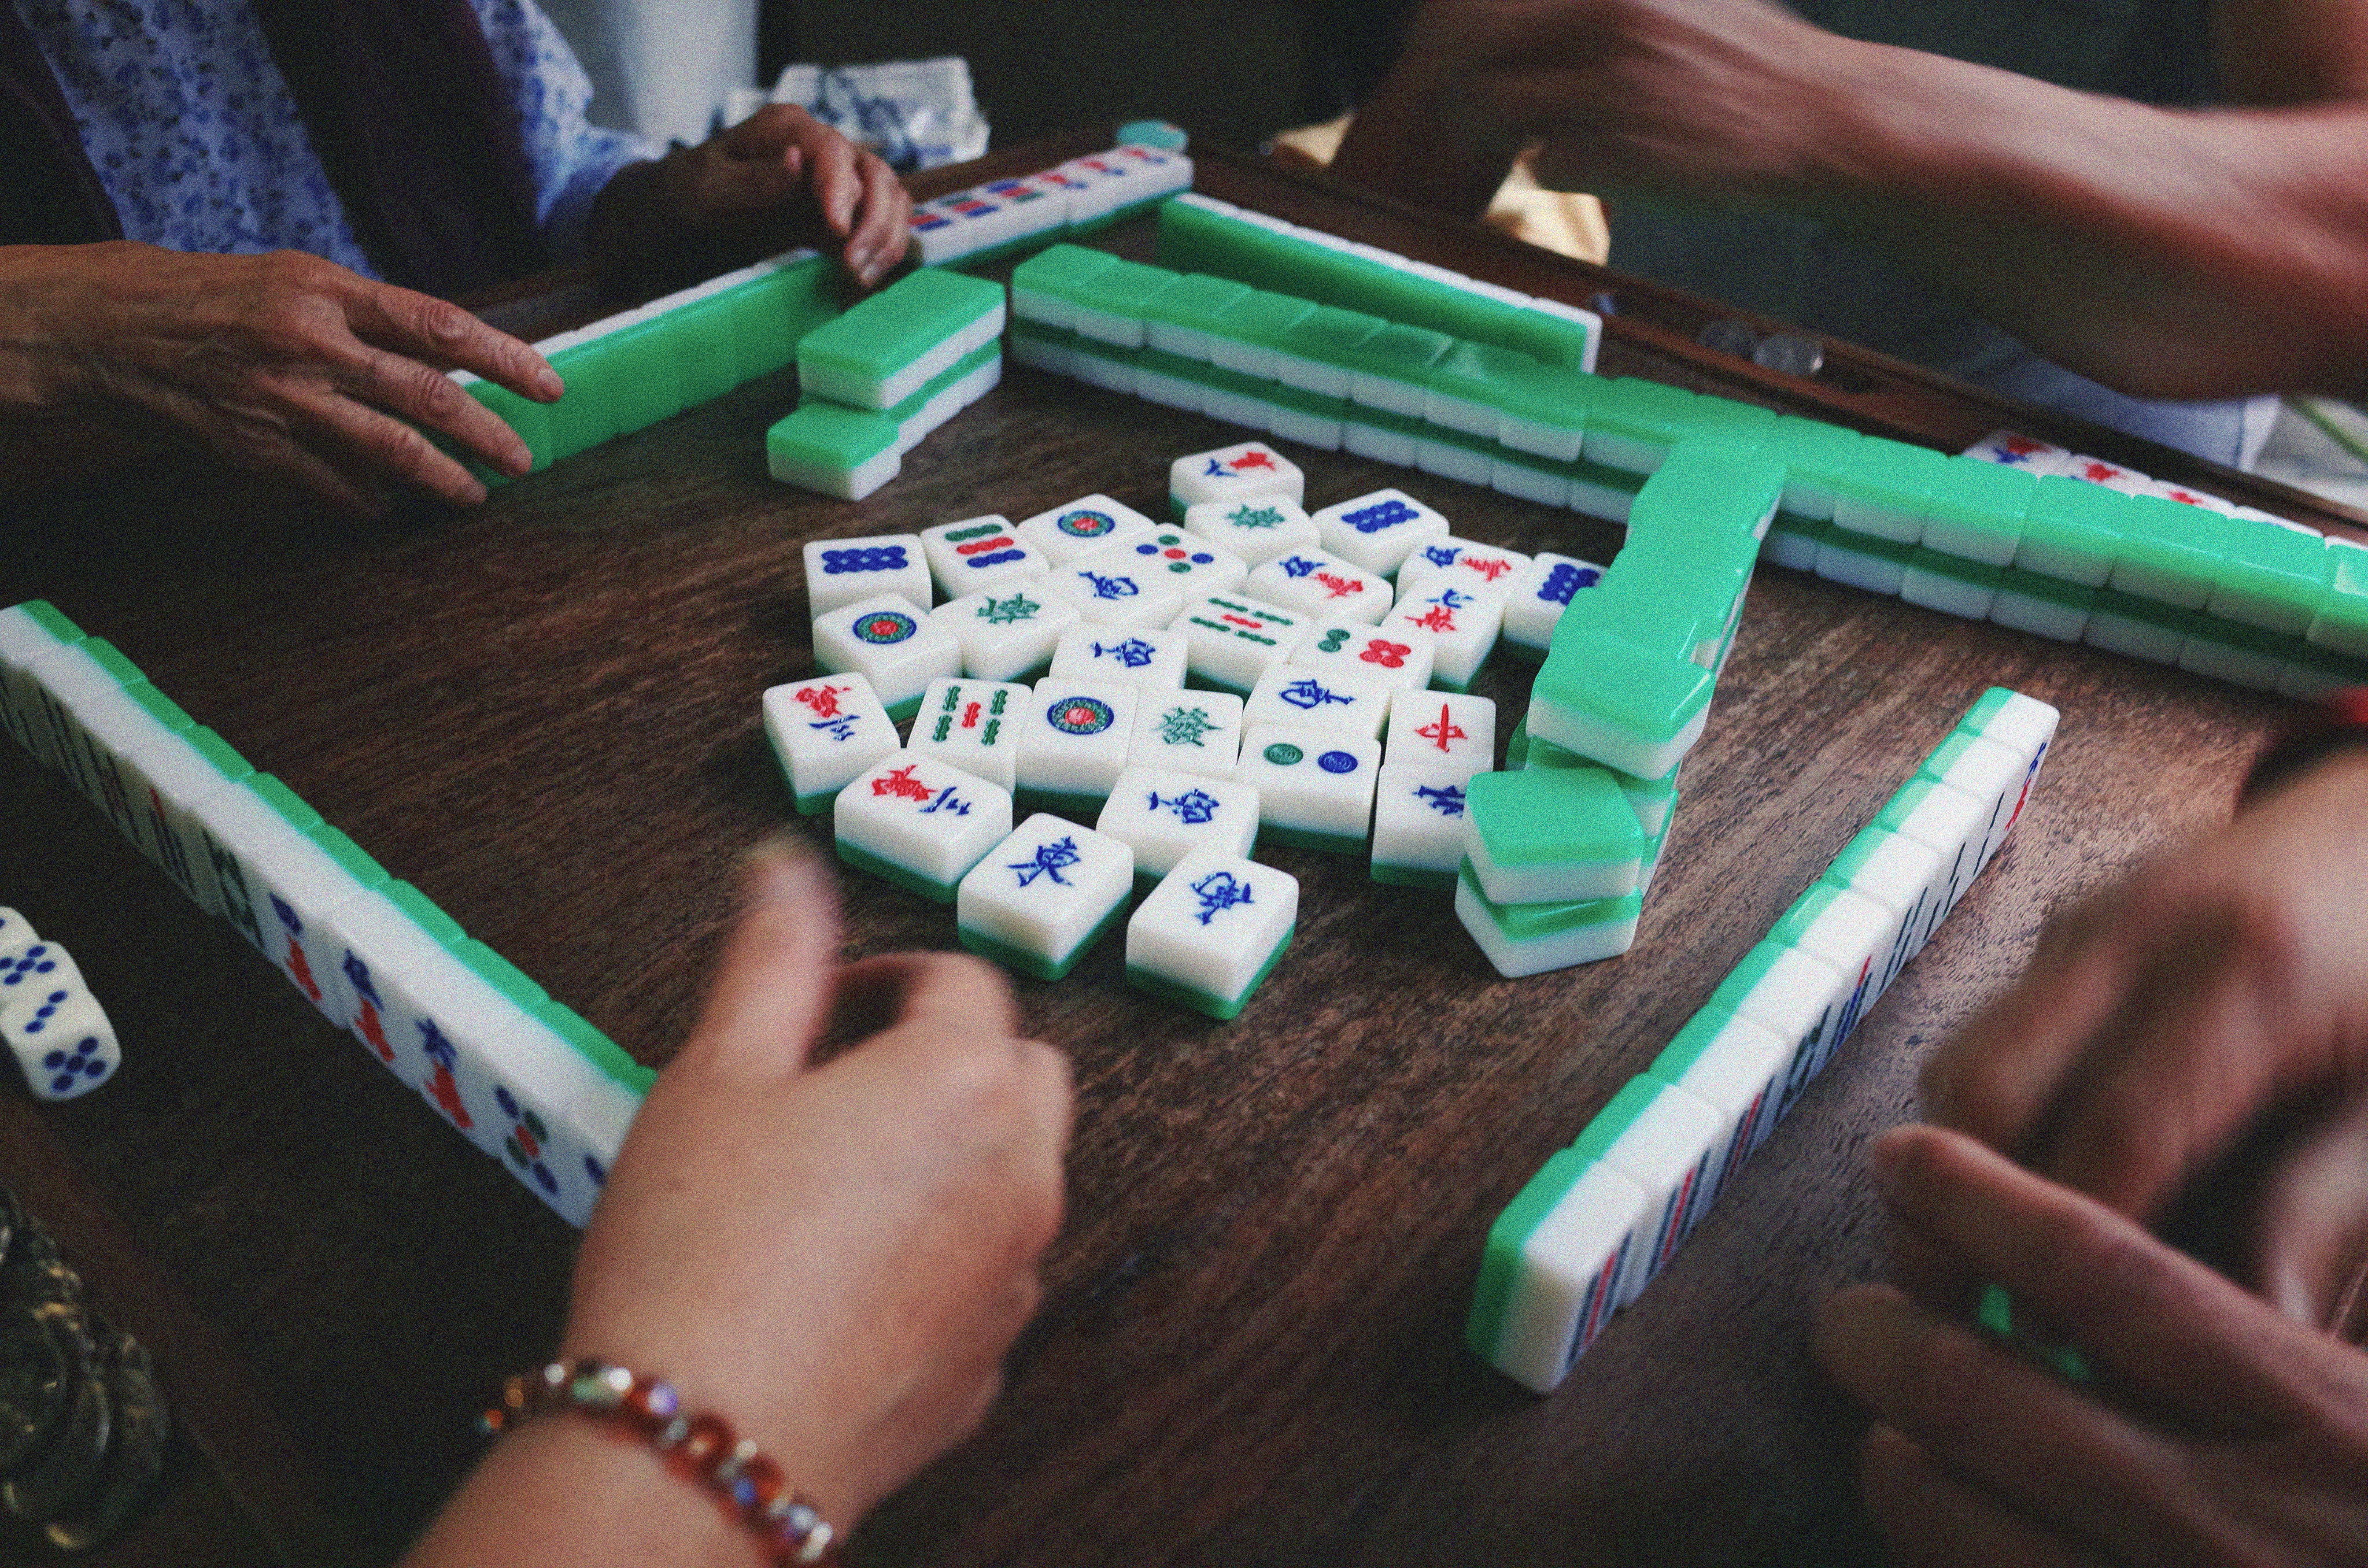 There are many variations of mahjong played around the world, with different rules and scoring systems and in some, unique tiles. Photo: Getty Images